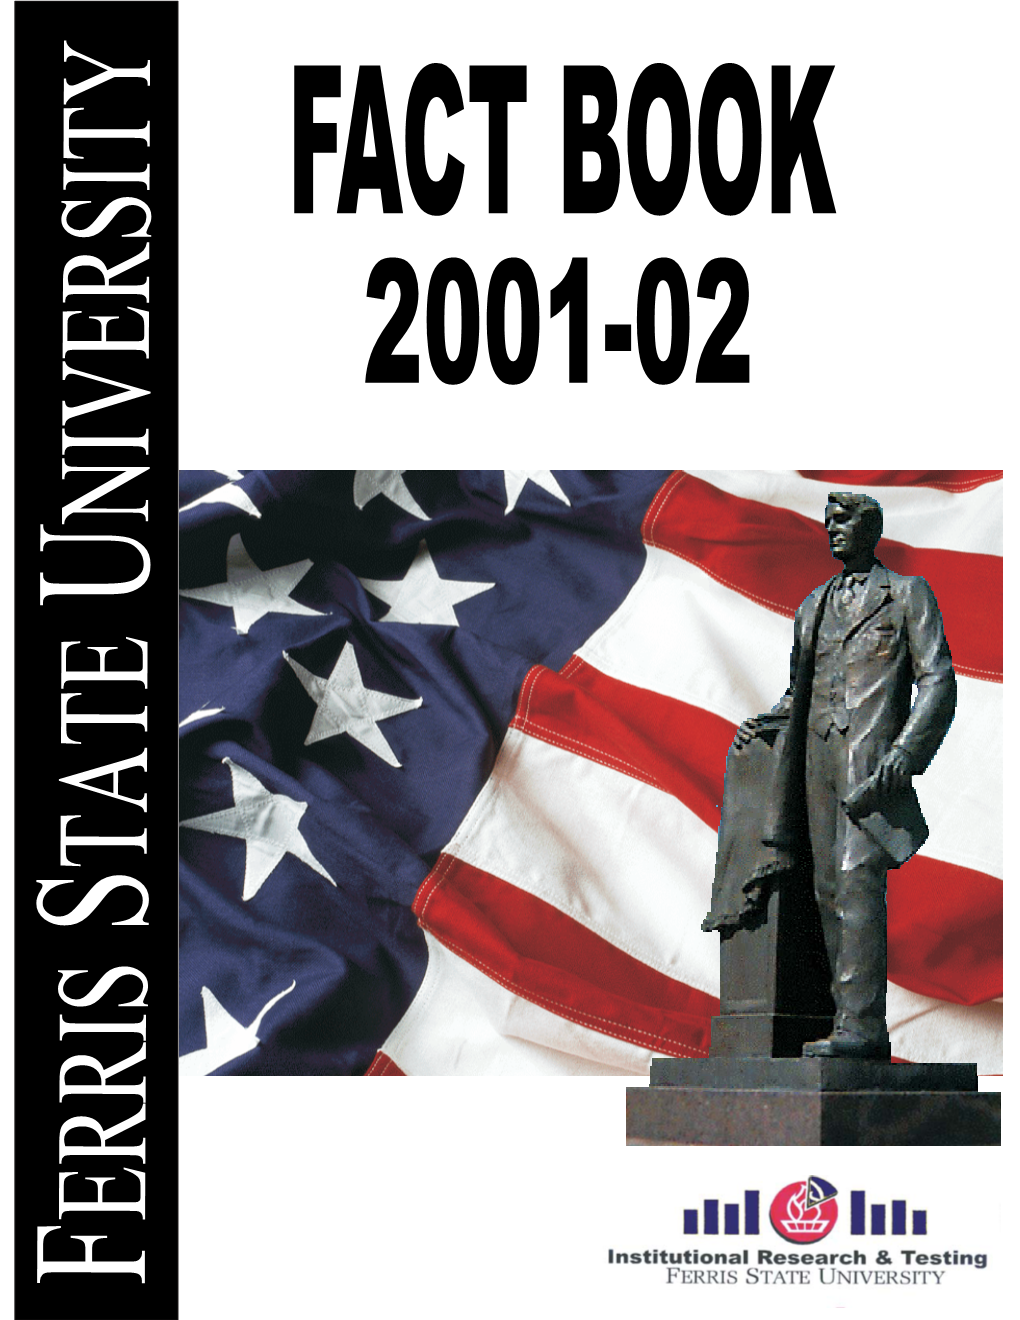 2001-2002 Fact Book to Include Several New Items, Such As